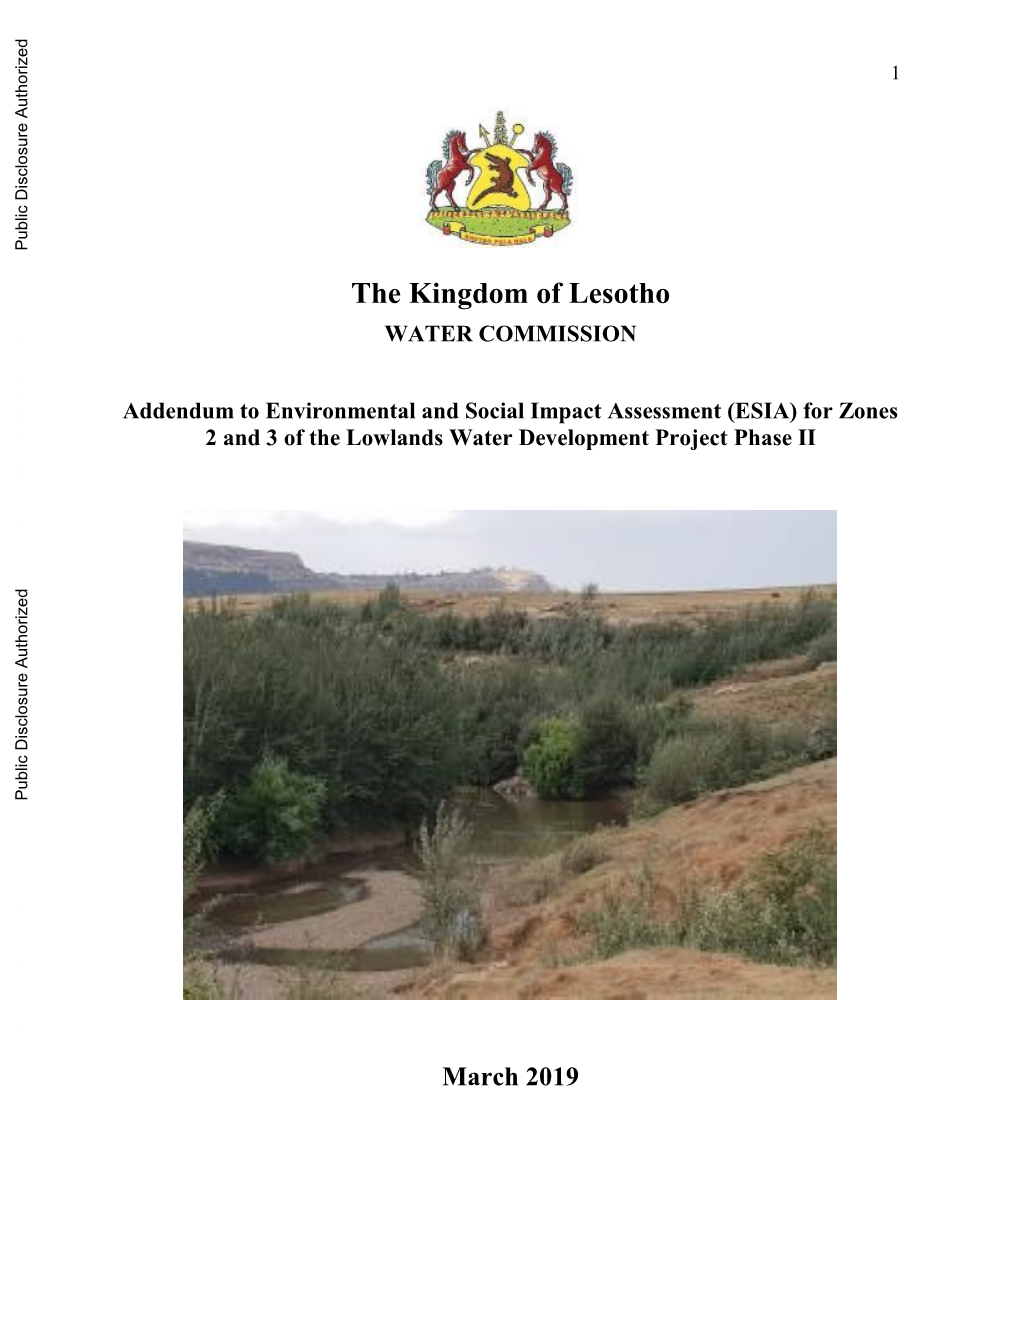 The Kingdom of Lesotho WATER COMMISSION